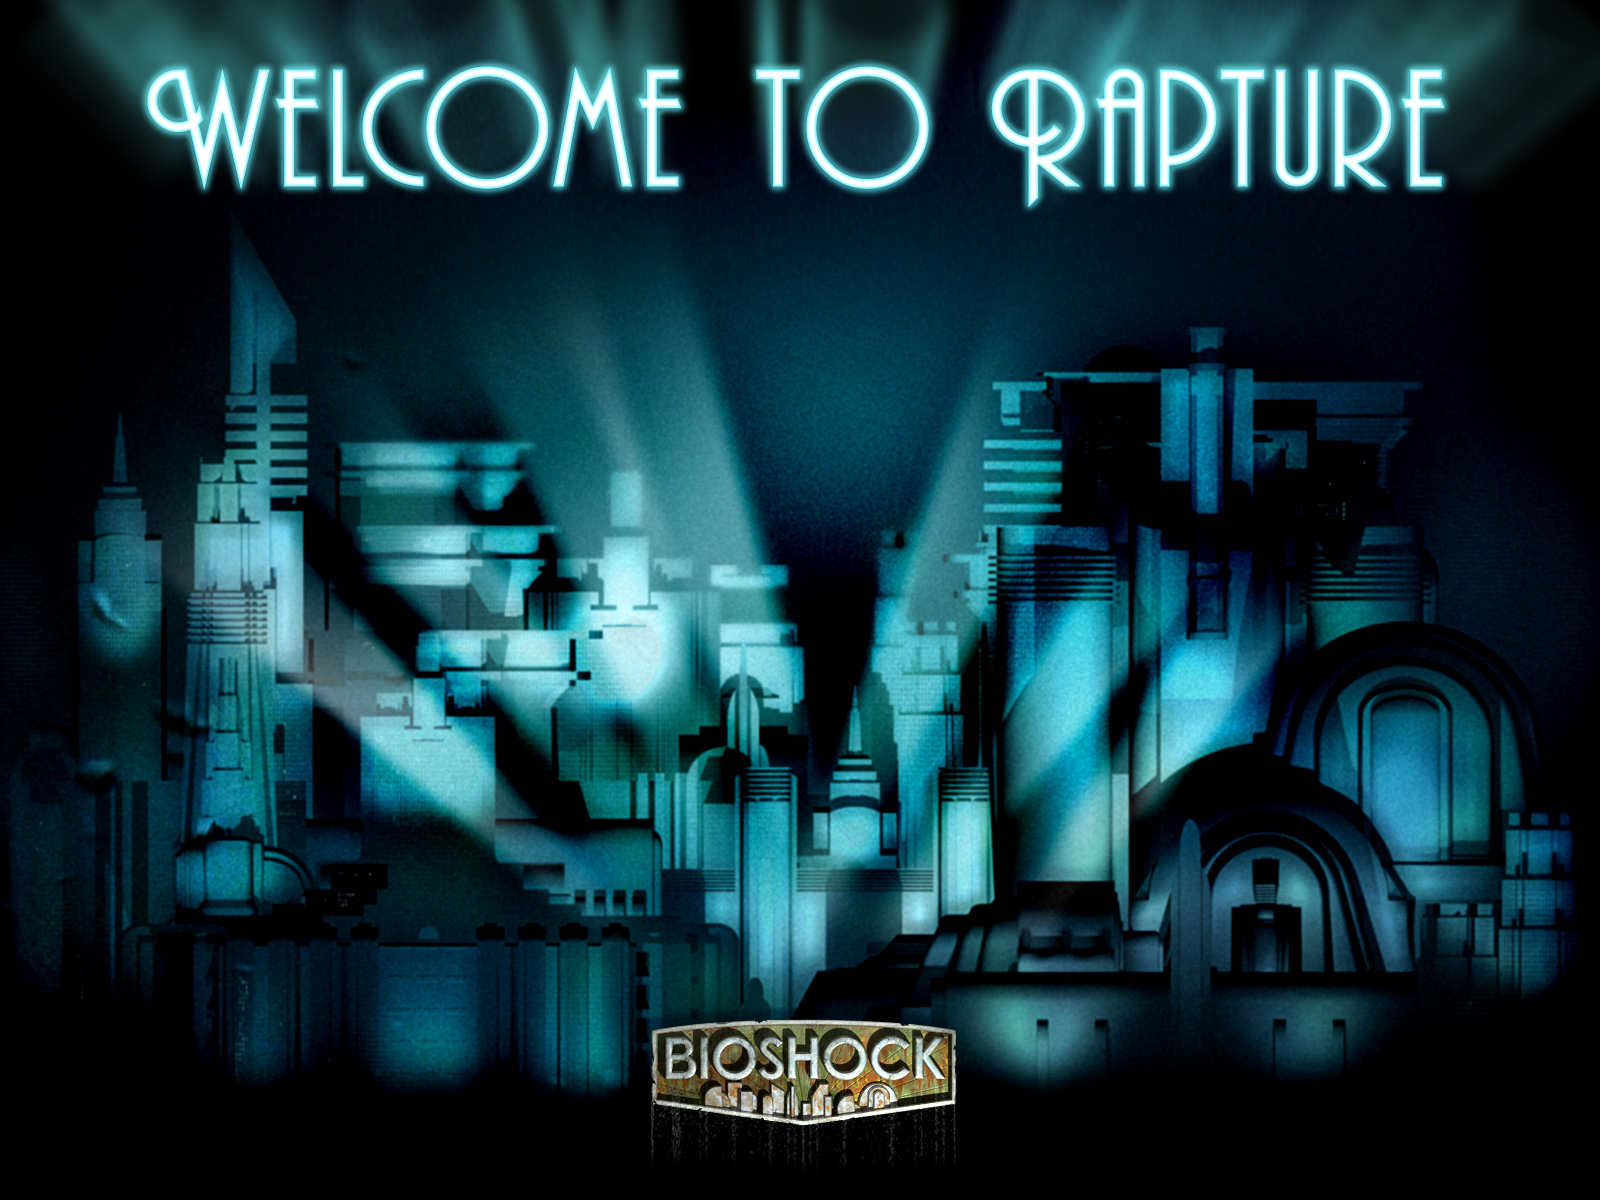 Rapture cityscape at night, inspired by Bioshock